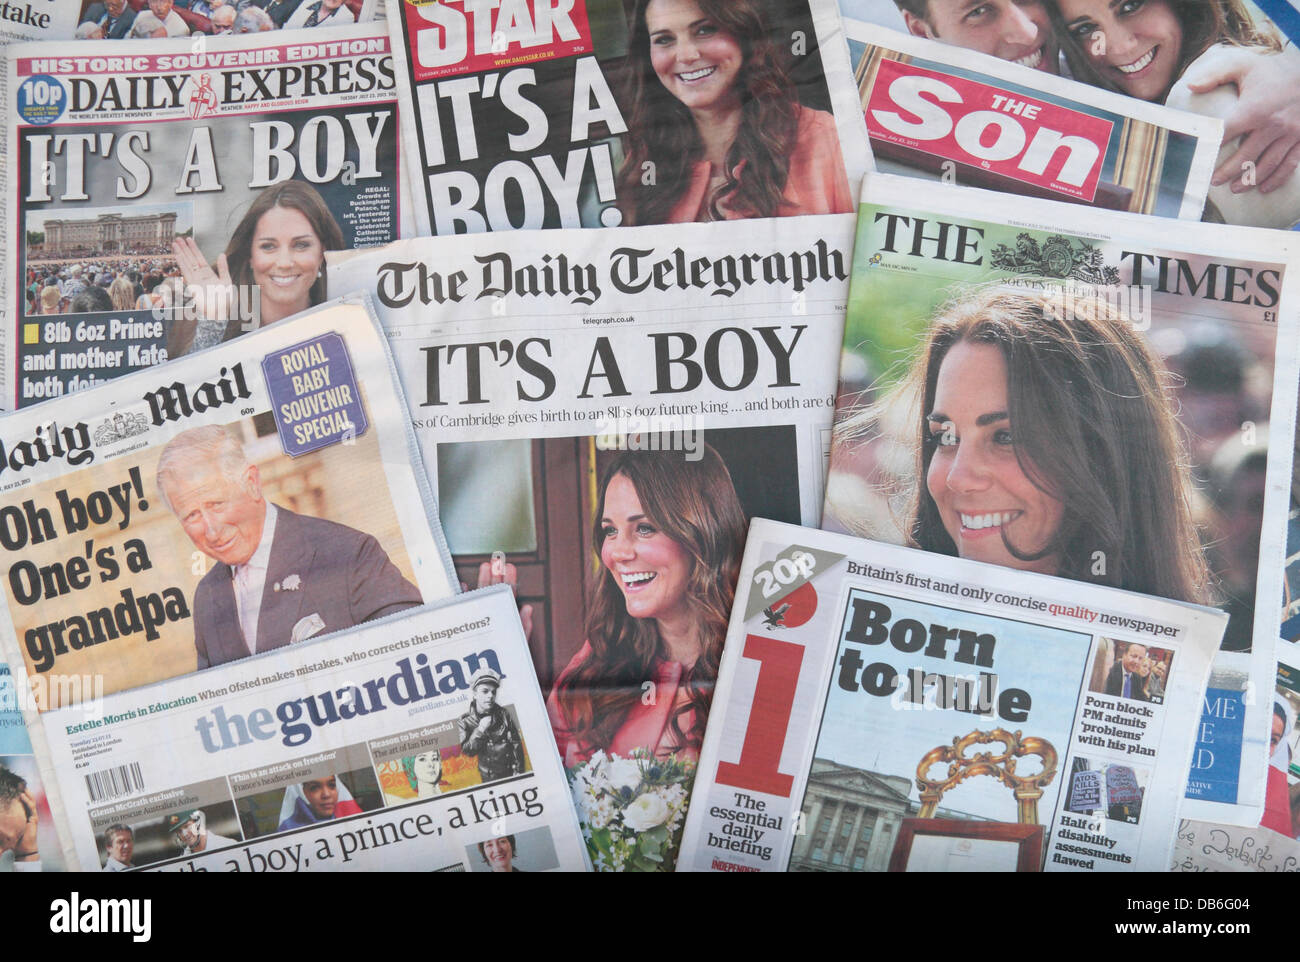 ROYAL BABY UK Daily Newspaper reaction on Tuesday 23rd July 2013 to the news that the Duchess of Cambridge, wife of the Duke of Cambridge, had given birth to a boy on Monday 22nd July 2013. Credit:  Maurice Savage/Alamy Live News Stock Photo